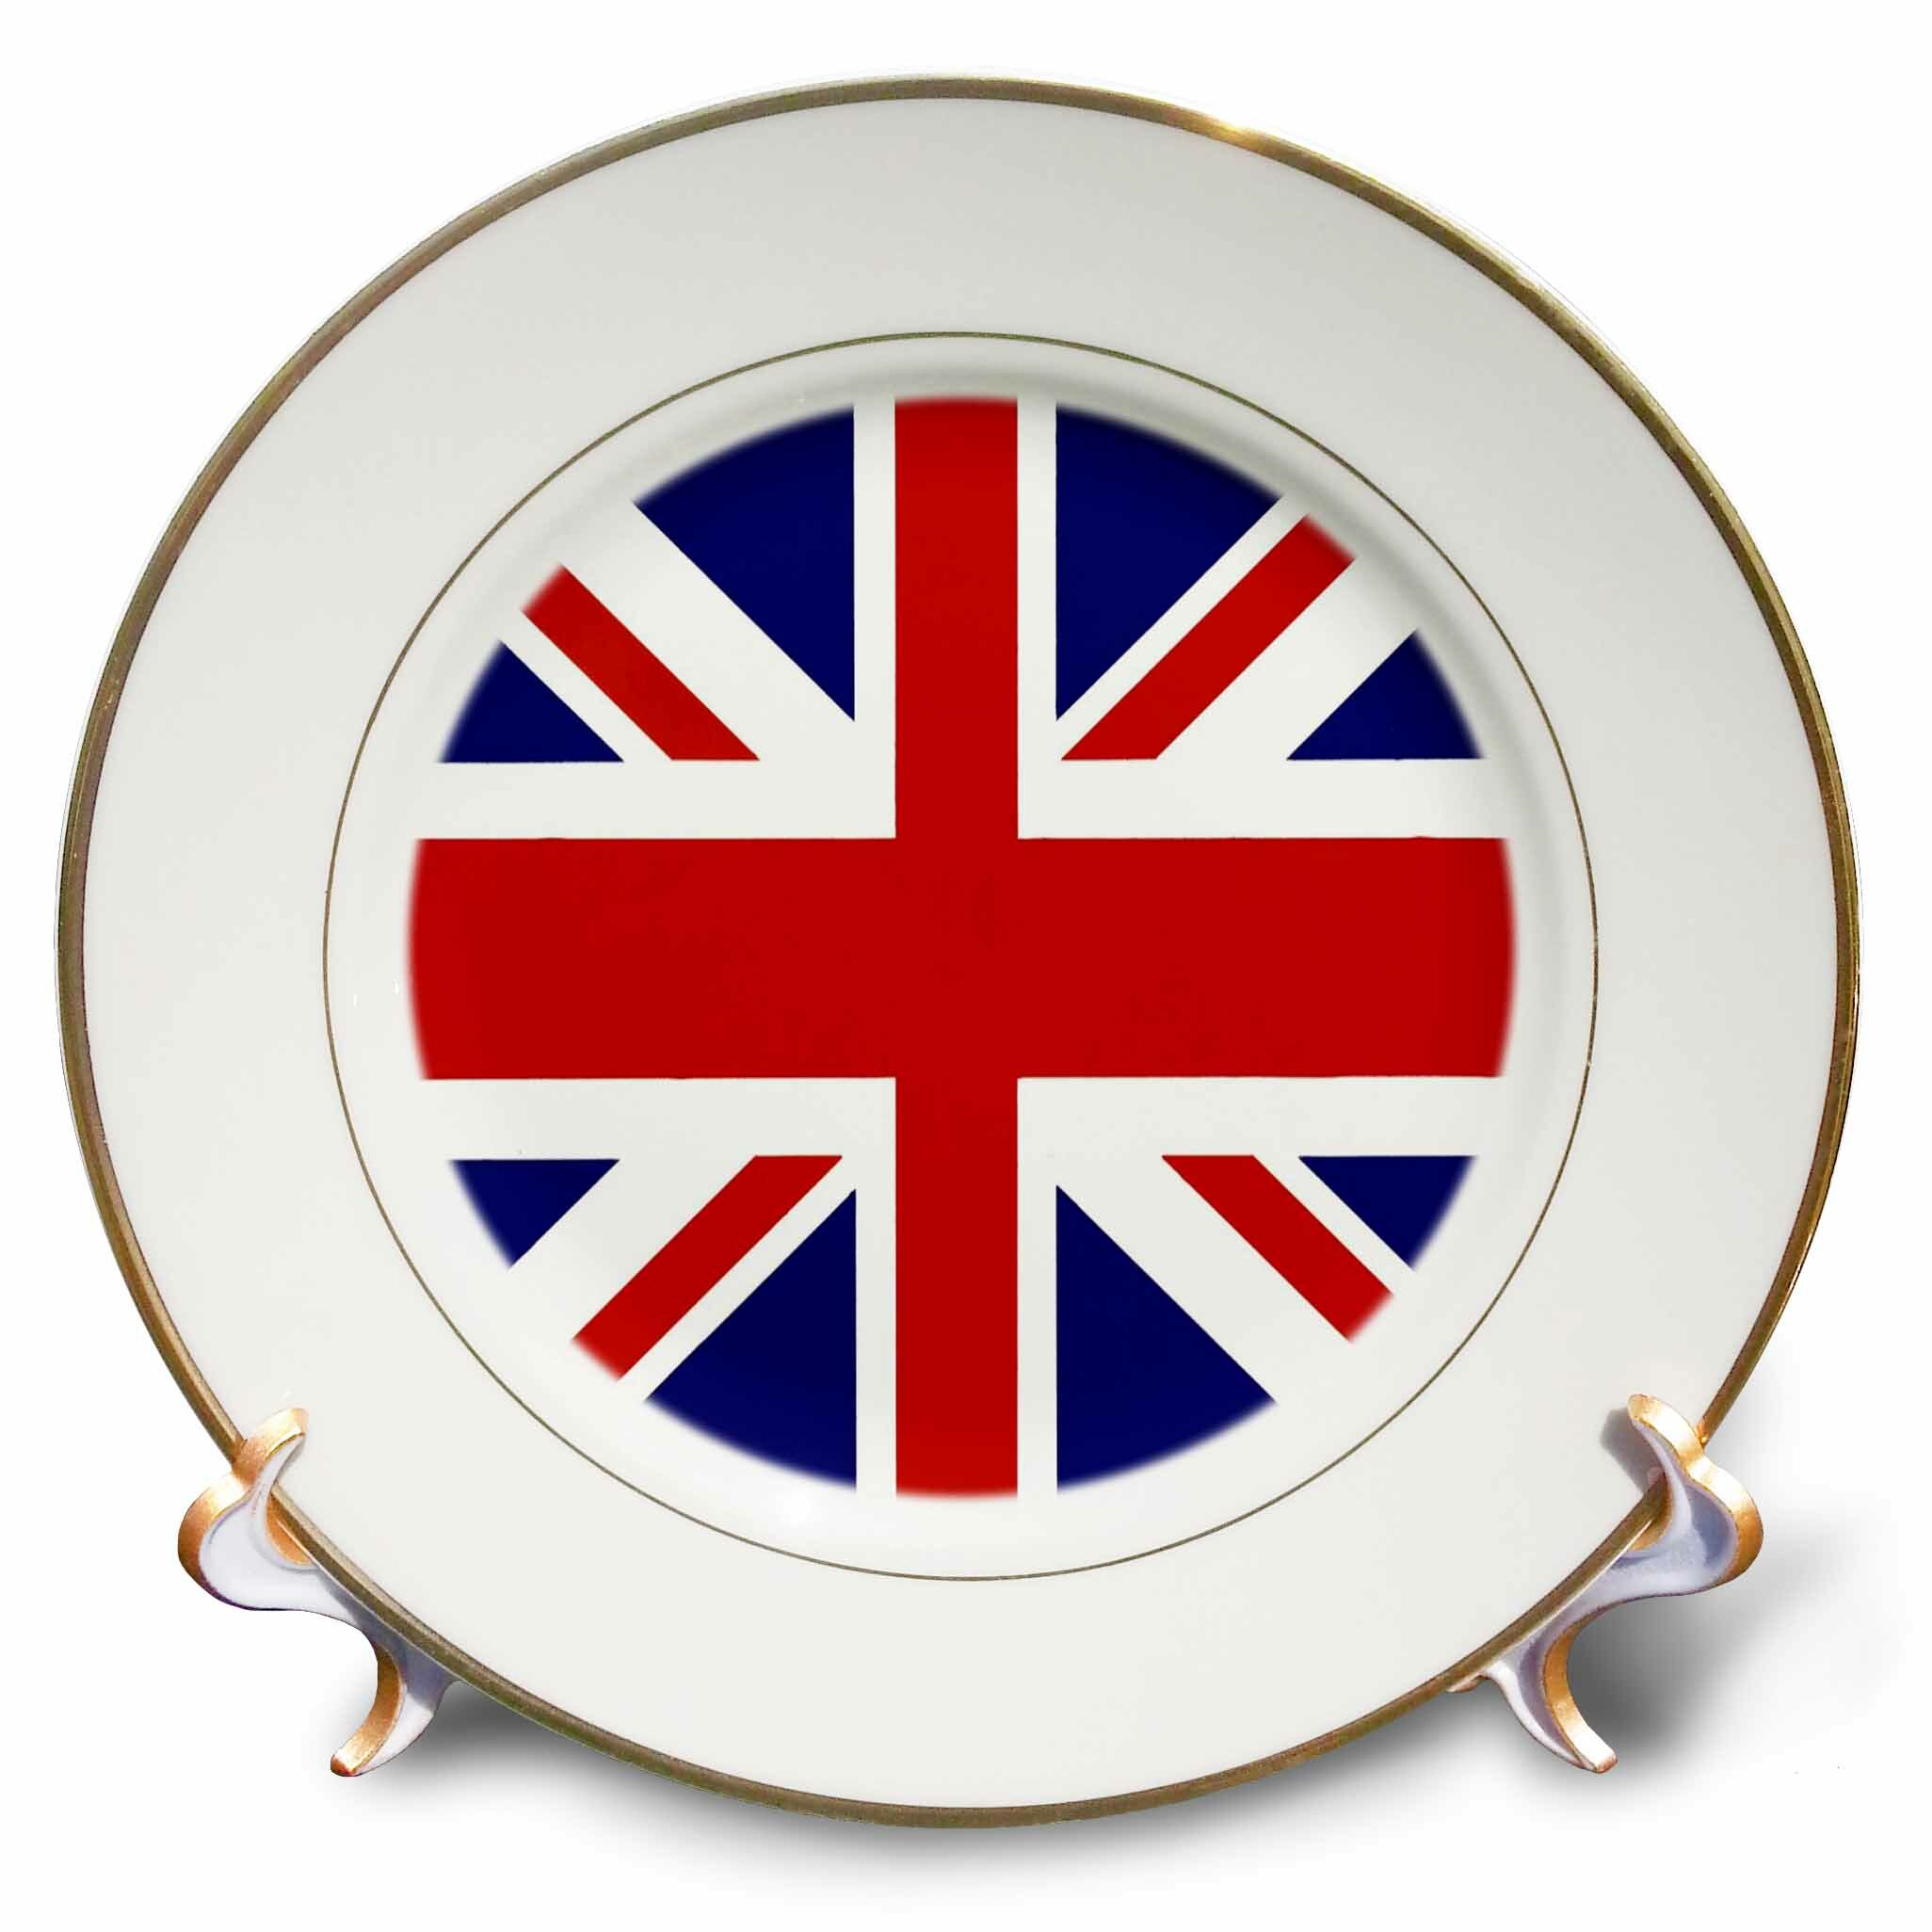 Union Jack House Door Number Plaque British Flag Ceramic House Sign Any Number